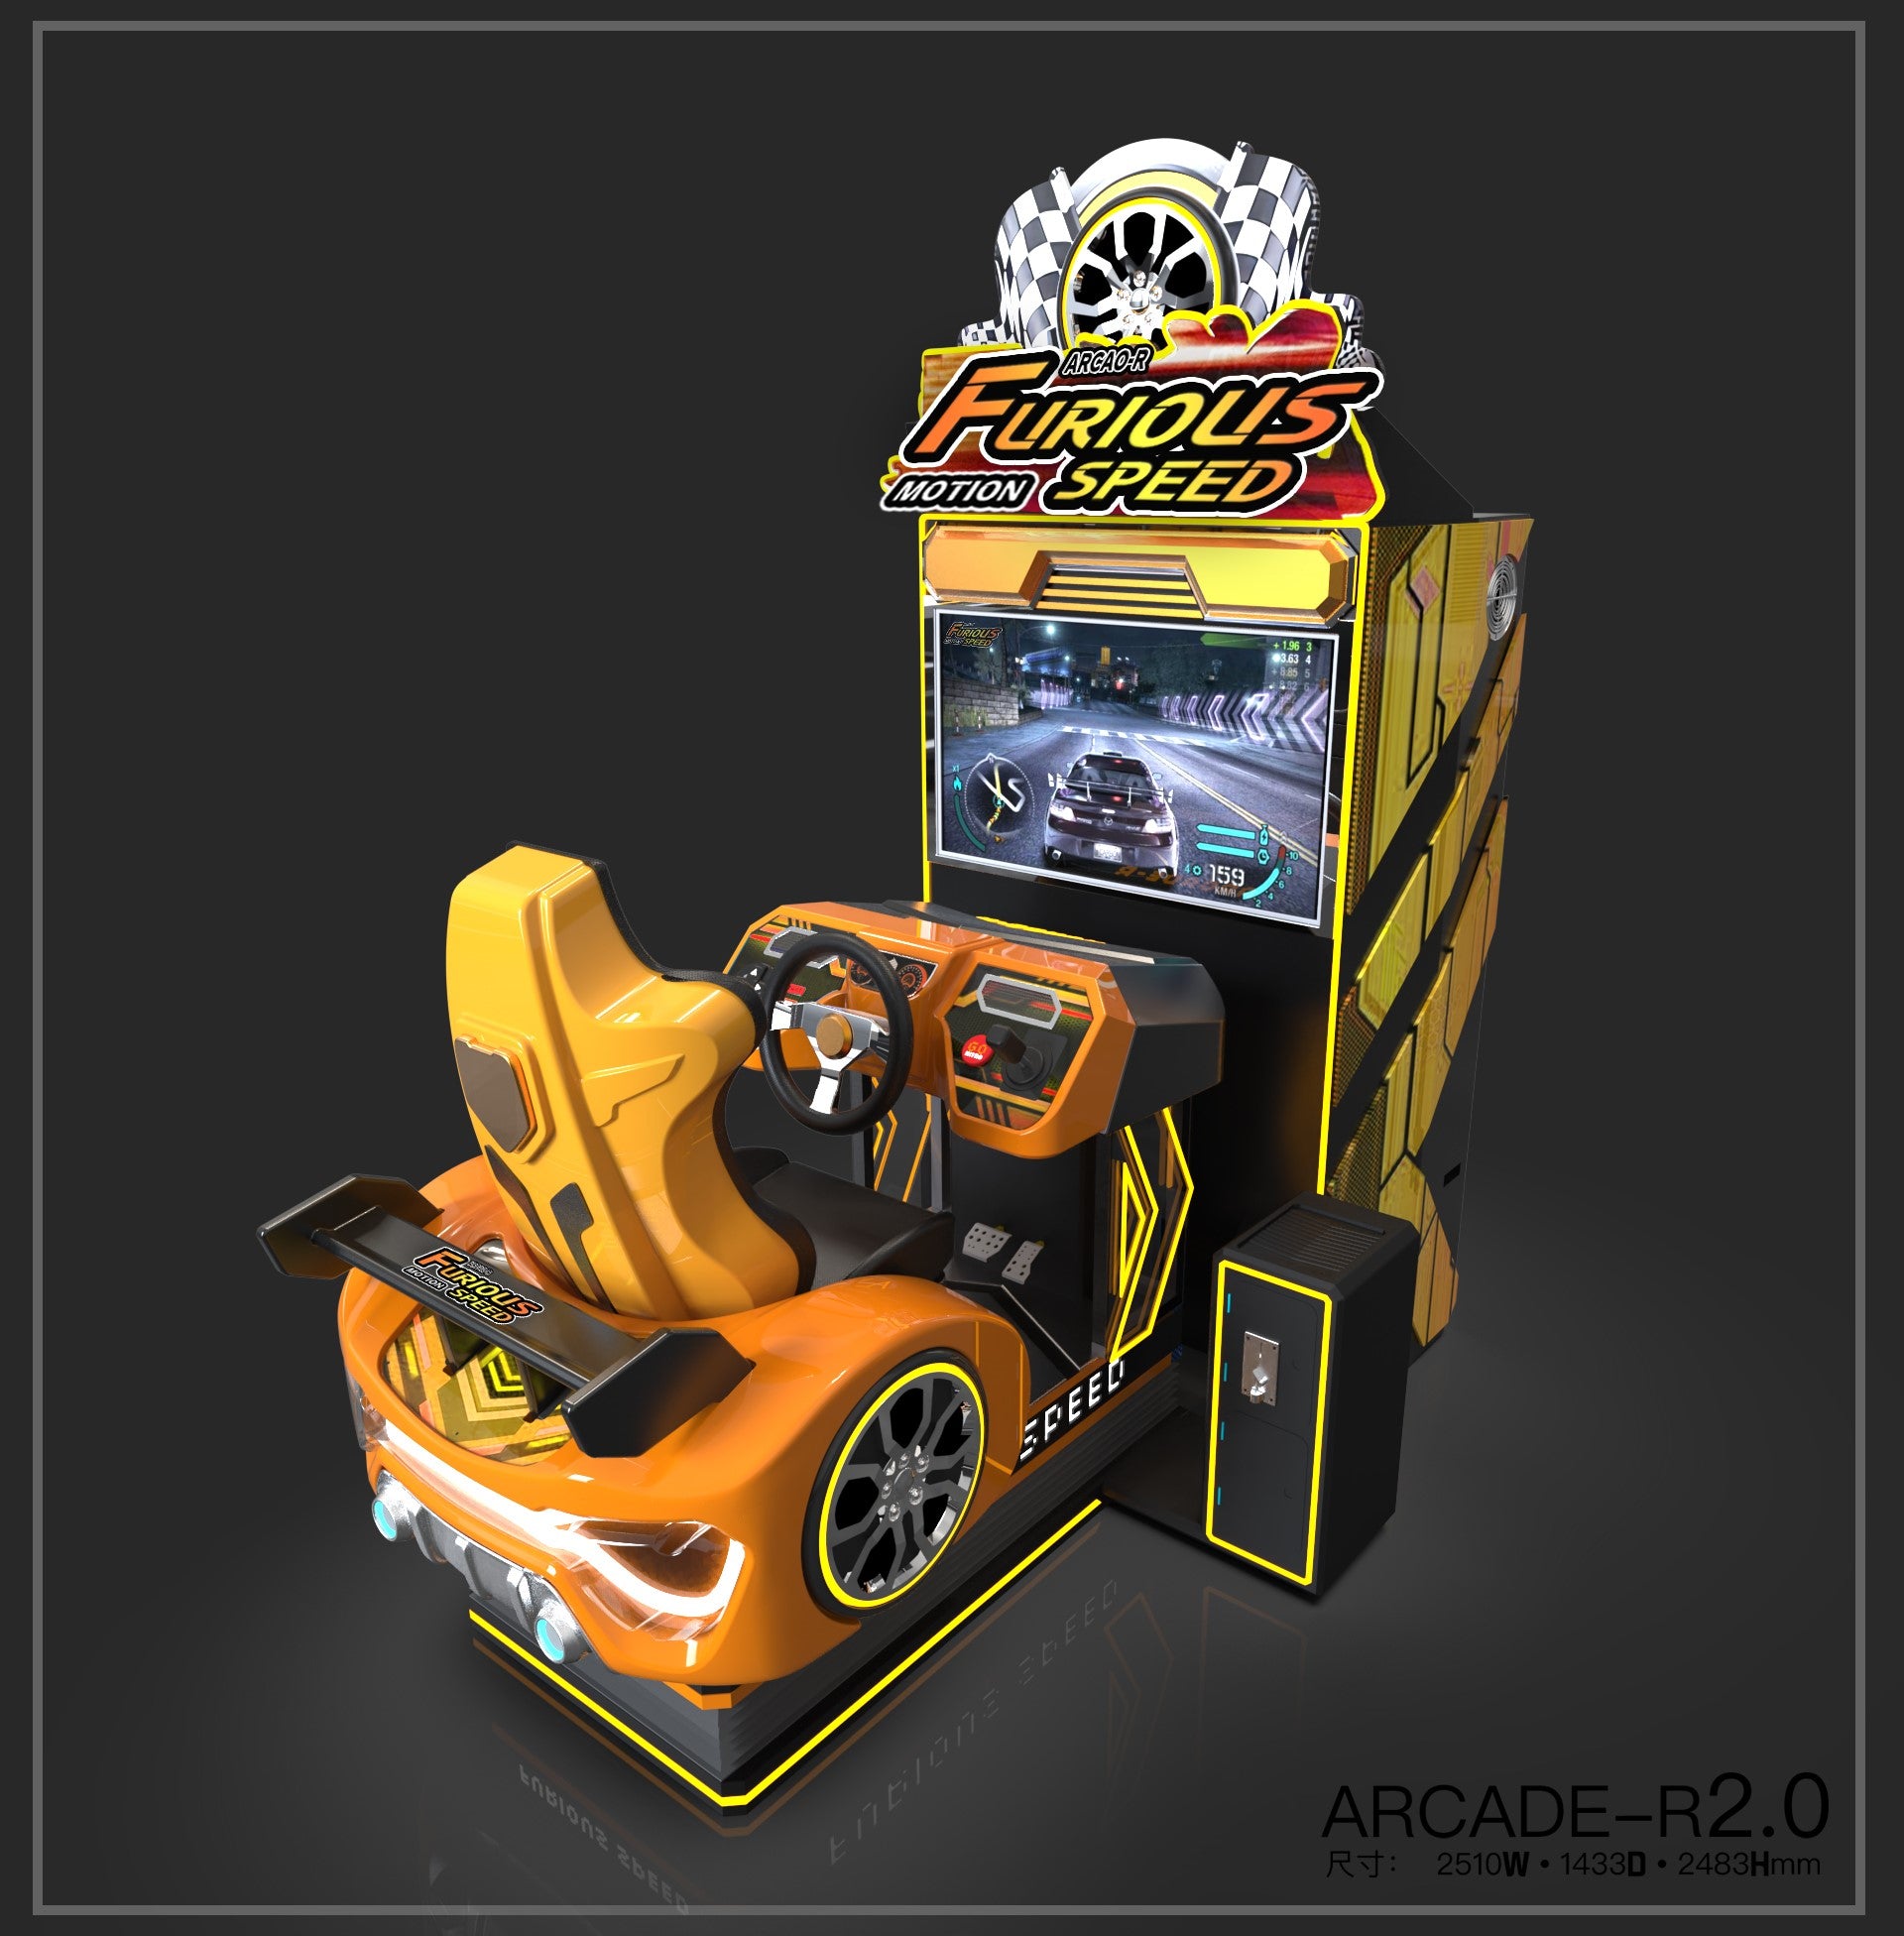 Furious Speed - Motion - Video Arcade Game